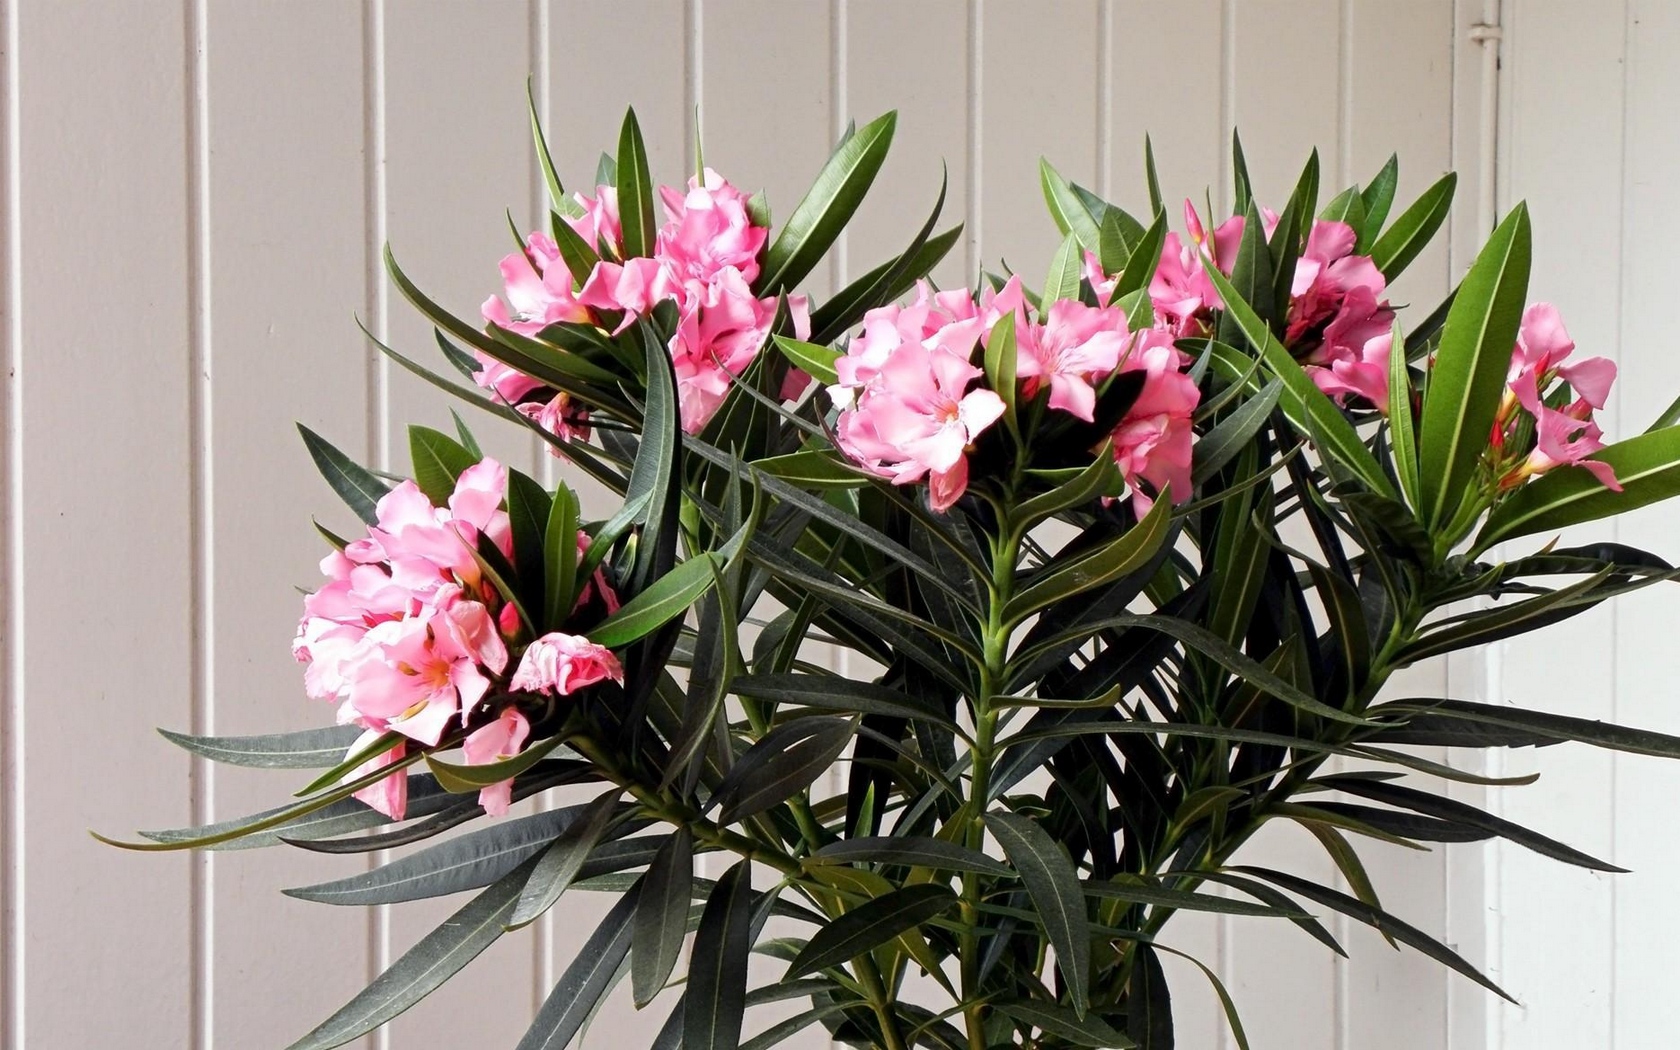 Caring for an oleander at home is not fraught with significant difficulties, but requires a grower to know the nuances of growing